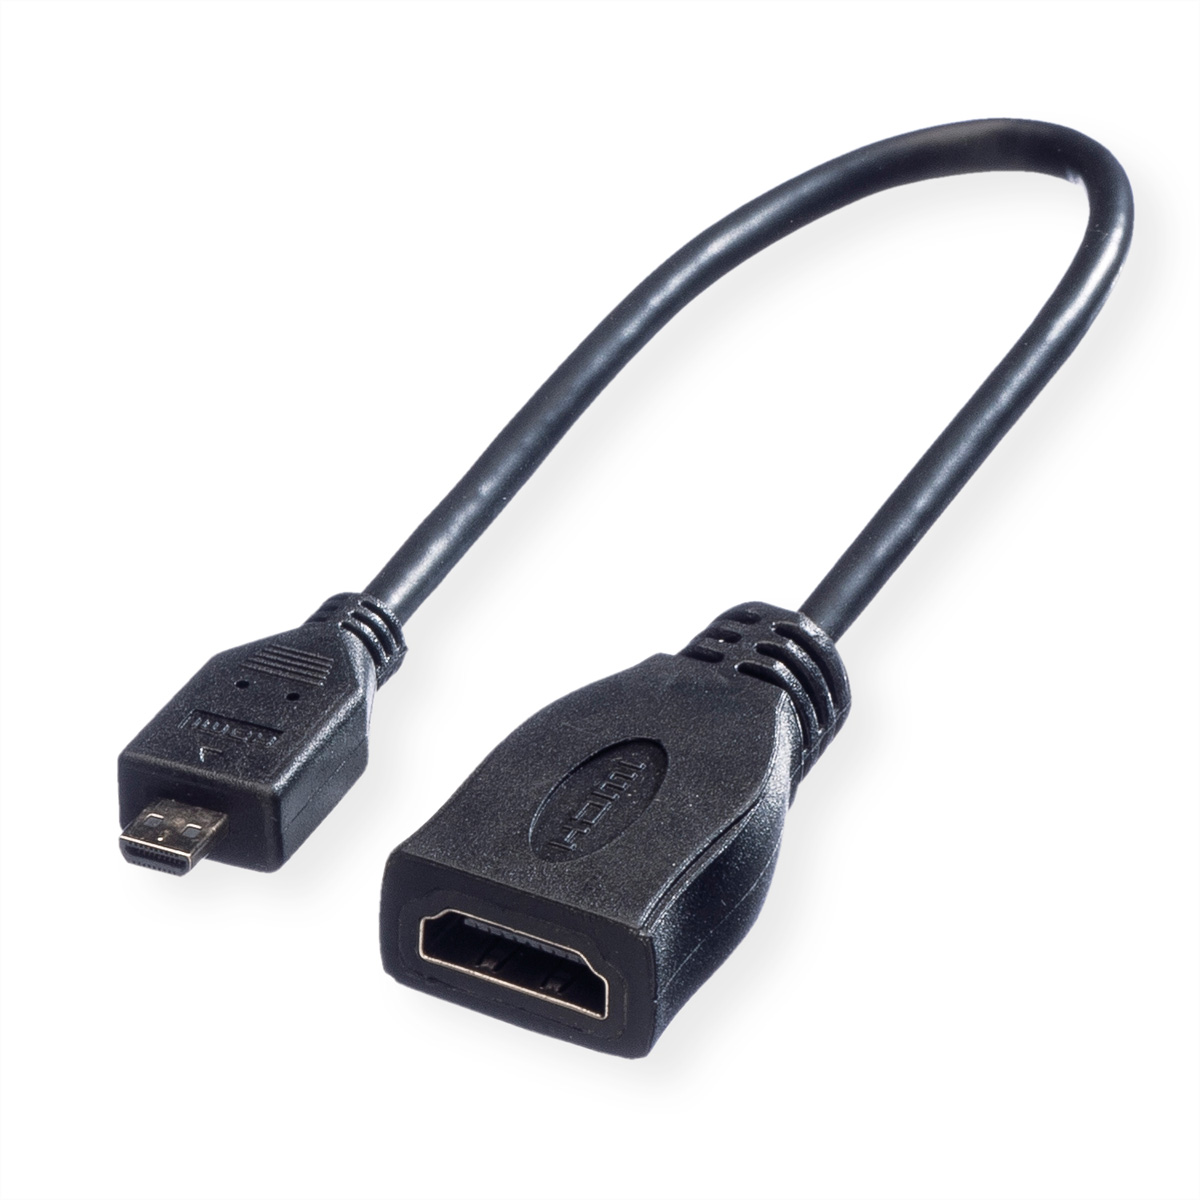 Ethernet HDMI BU High HDMI High ROLINE Kabel HDMI Micro Kabel Speed mit with Micro ST - Speed HDMI Ethernet,